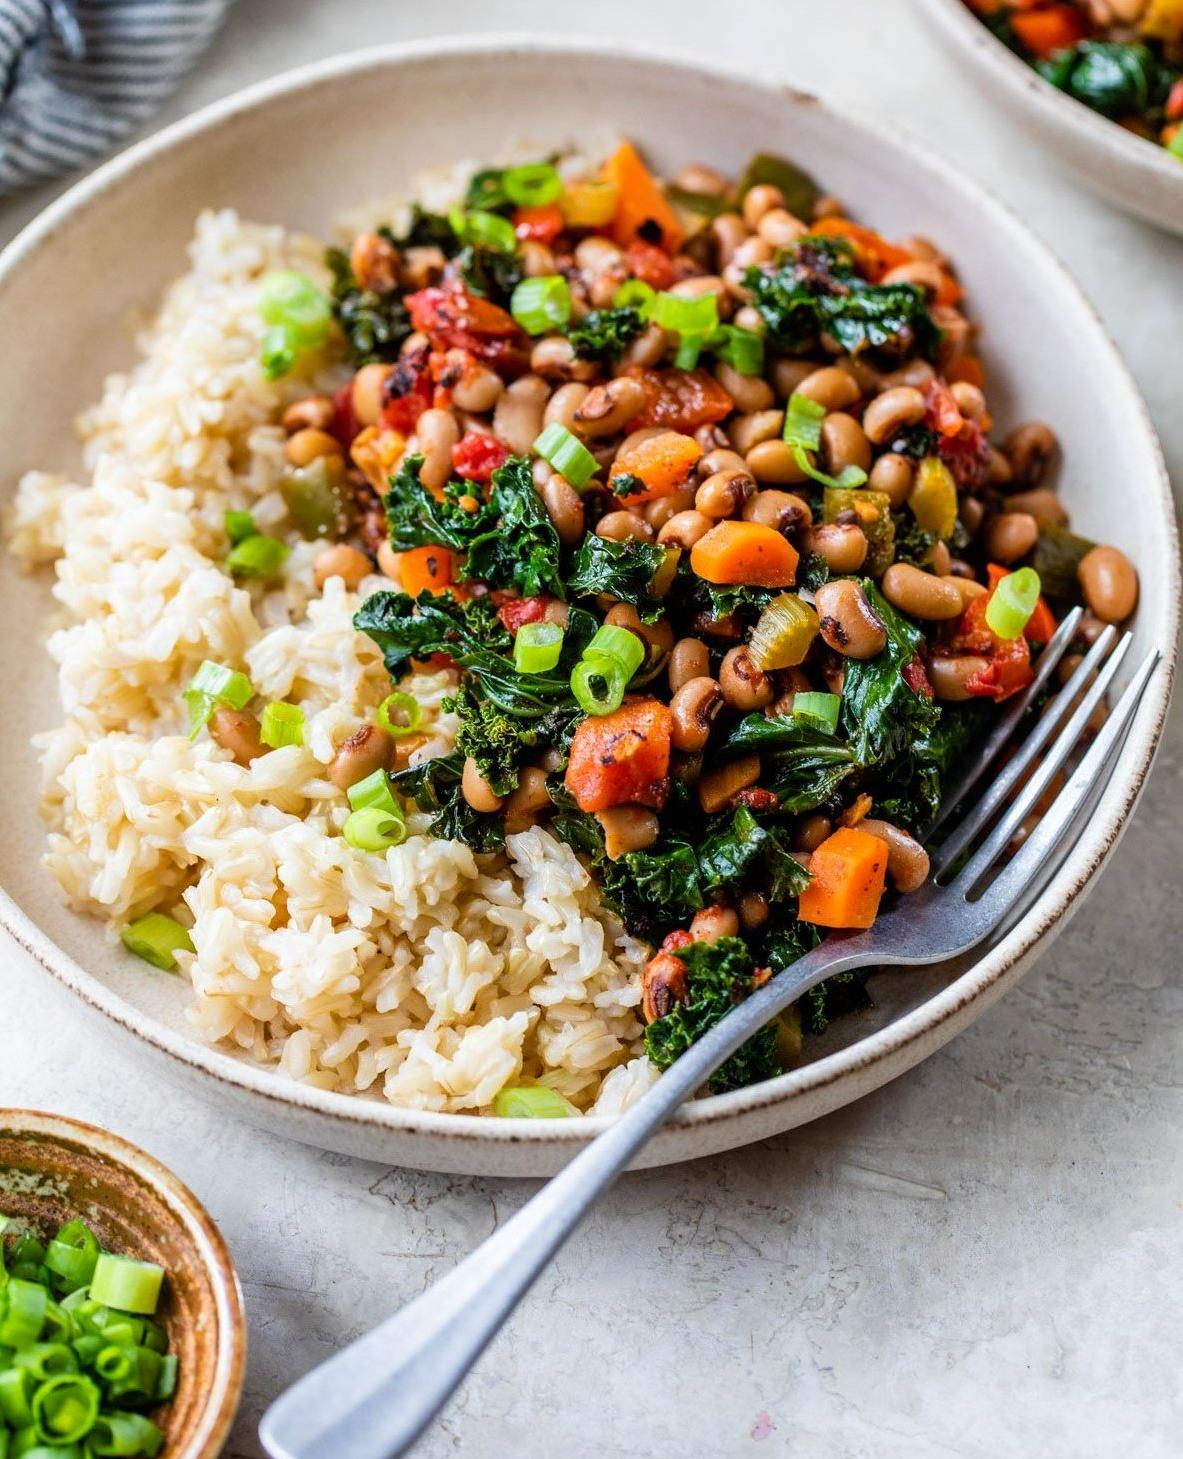  Get ready for a tasty journey to the South with this vegetarian variation of Hoppin' John.